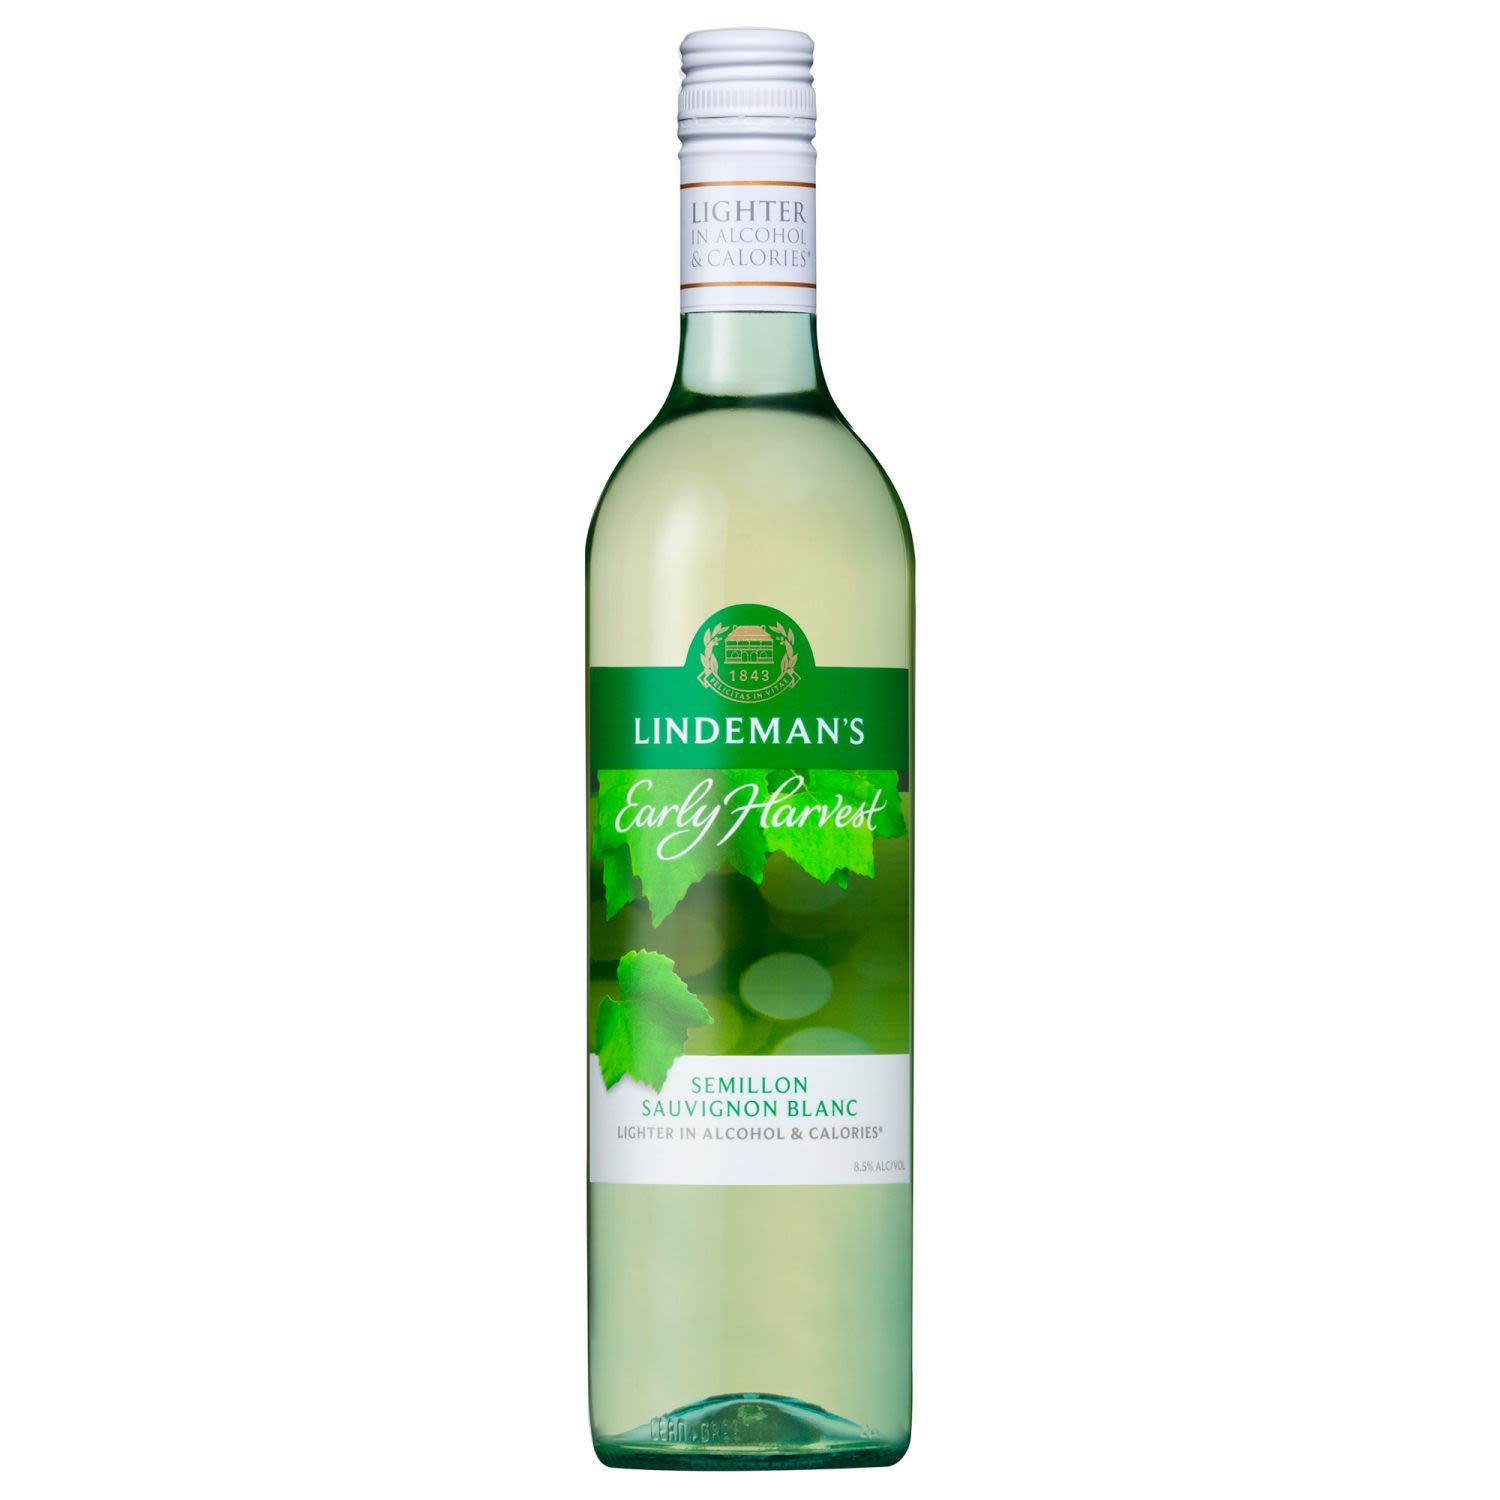 Delightful passionfruit & melon aromas leap out of the glass. Fresh fruit flavours, cut grass & lychees mix beautifully on the palate. All balanced by a crisp dry finish, providing an easy drinking wine.<br /> <br />Alcohol Volume: 8.50%<br /><br />Pack Format: Bottle<br /><br />Standard Drinks: 5</br /><br />Pack Type: Bottle<br /><br />Country of Origin: Australia<br /><br />Region: South Eastern Australia<br /><br />Vintage: '2018<br />